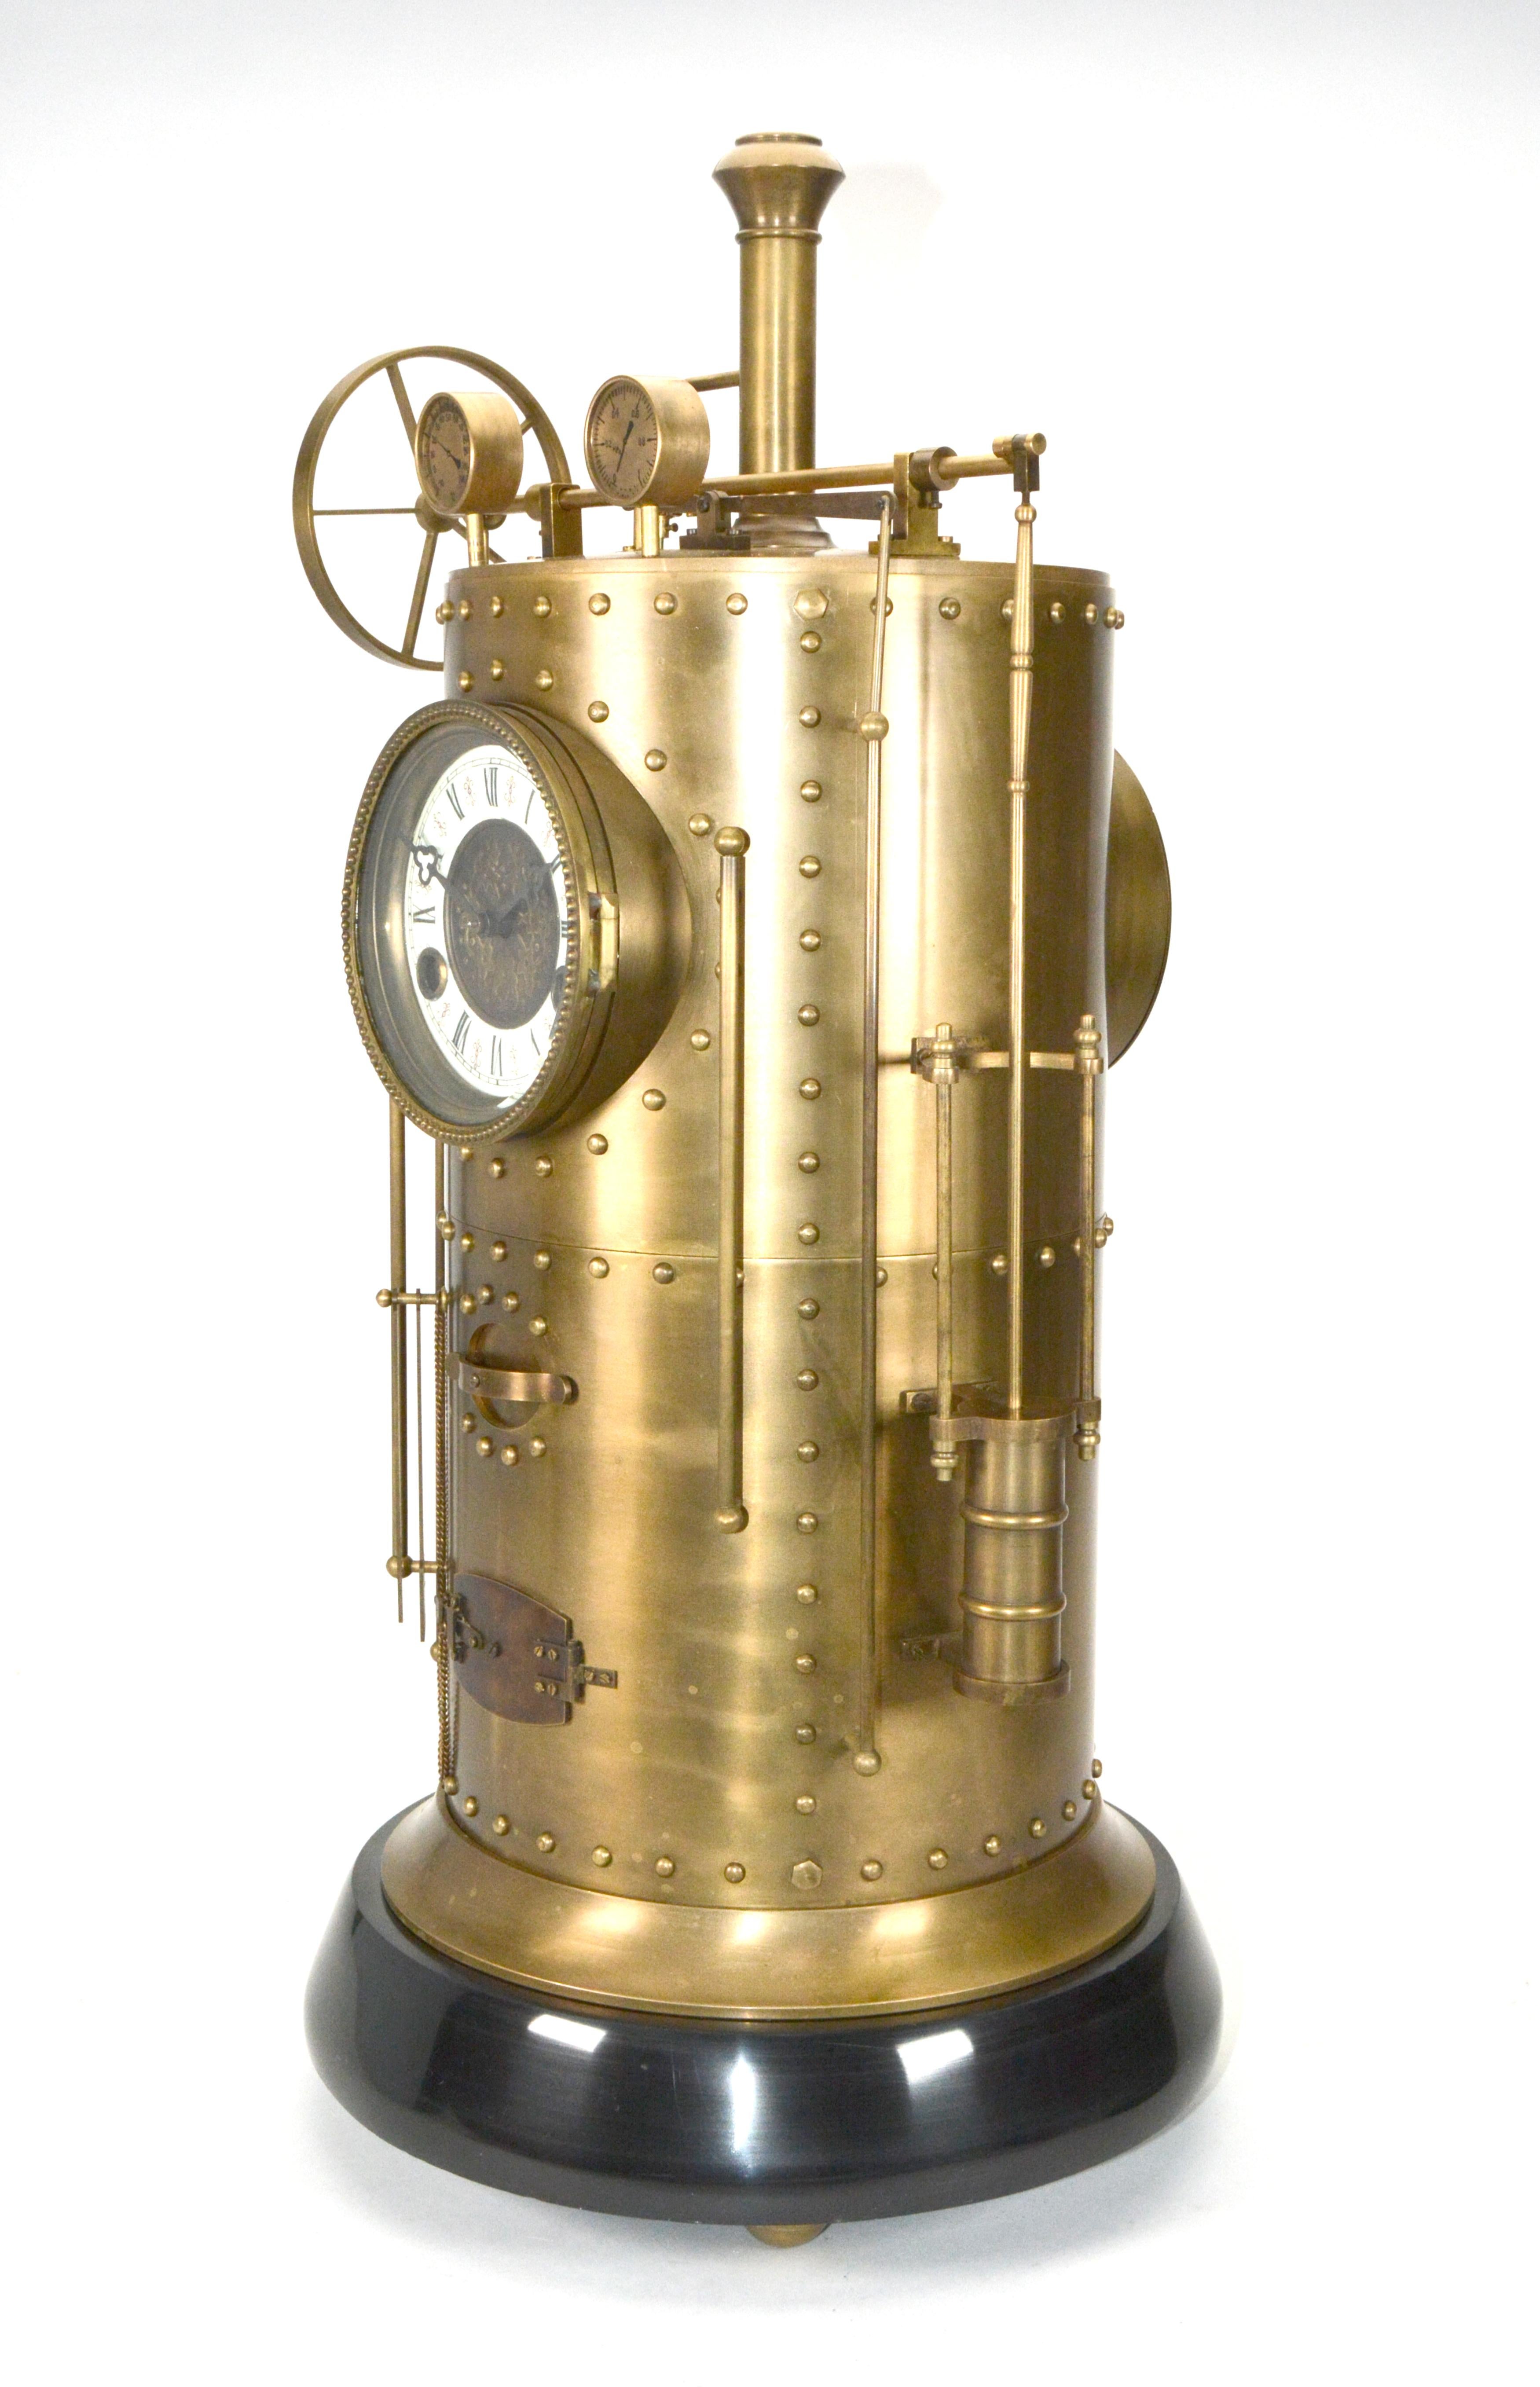 Large French Style 8 Day Brass Automaton Steam Engine Industrial Clock 

Here we have a wonderful example of the industrial series popular in French horology. While the clock is striking, the powertrain wheel spins around, which really puts life